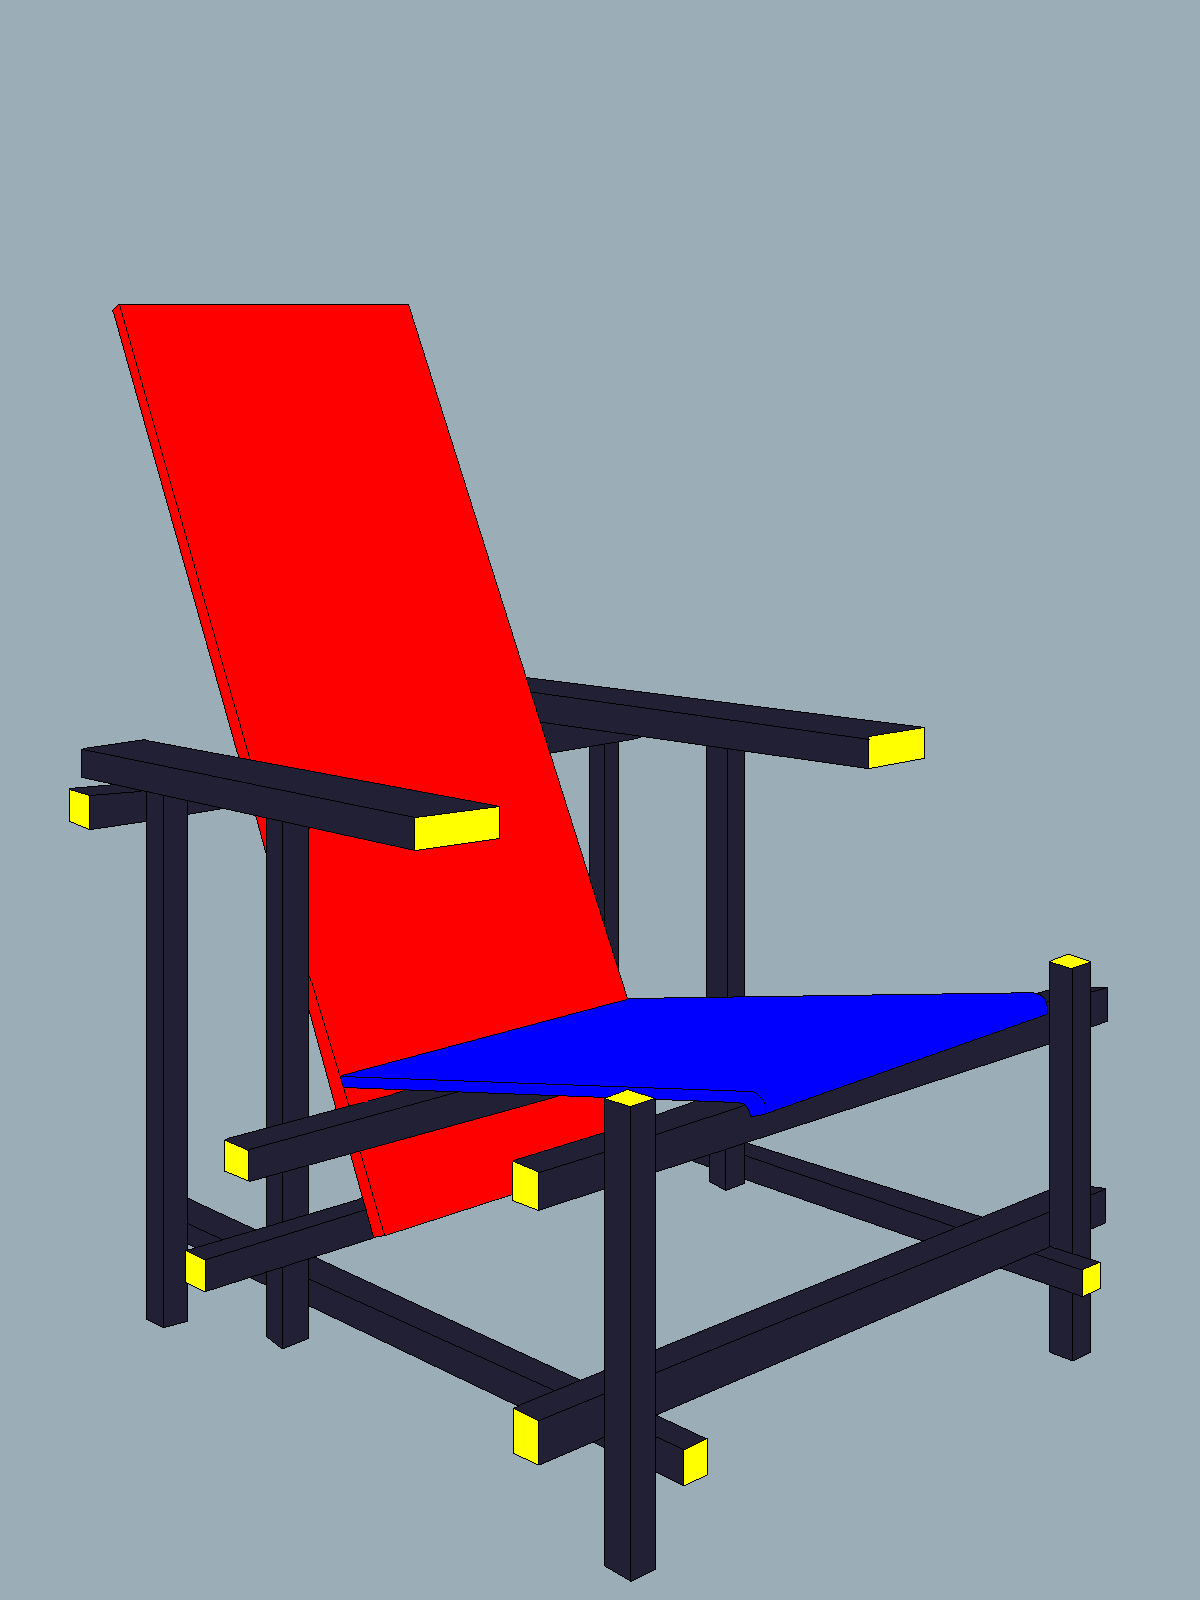 Digital sketch of a Red and Blue chair, drawn in Procreate on iPad.